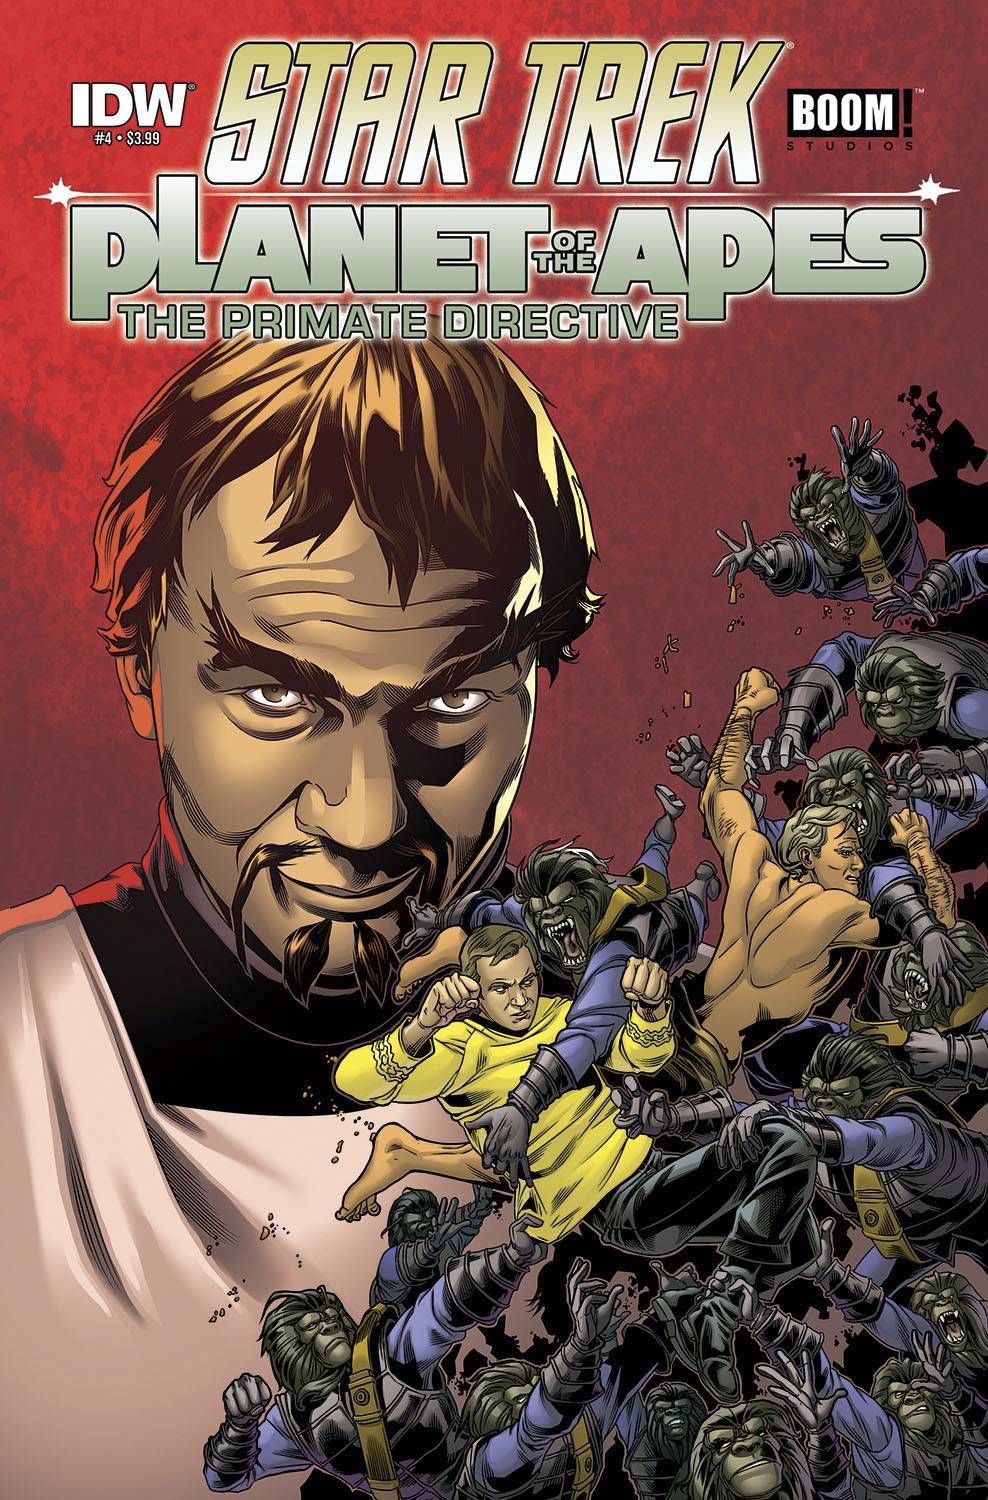 Star Trek/Planet of the Apes: The Primate Directive #4 Comic